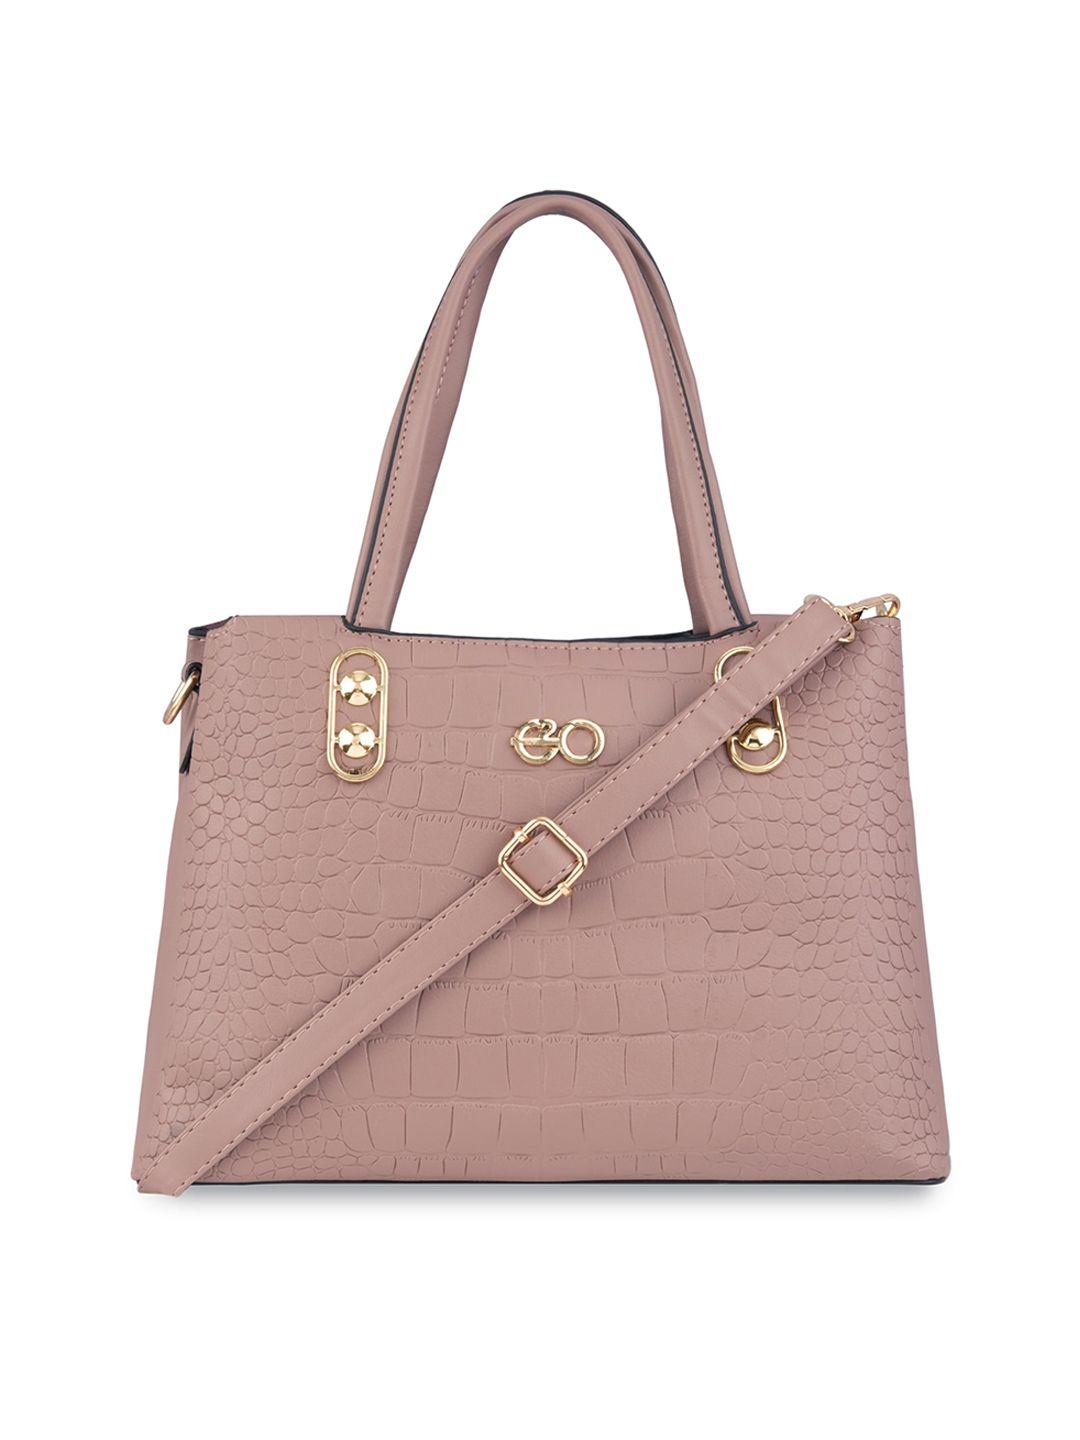 e2o pink texture structured handheld bag